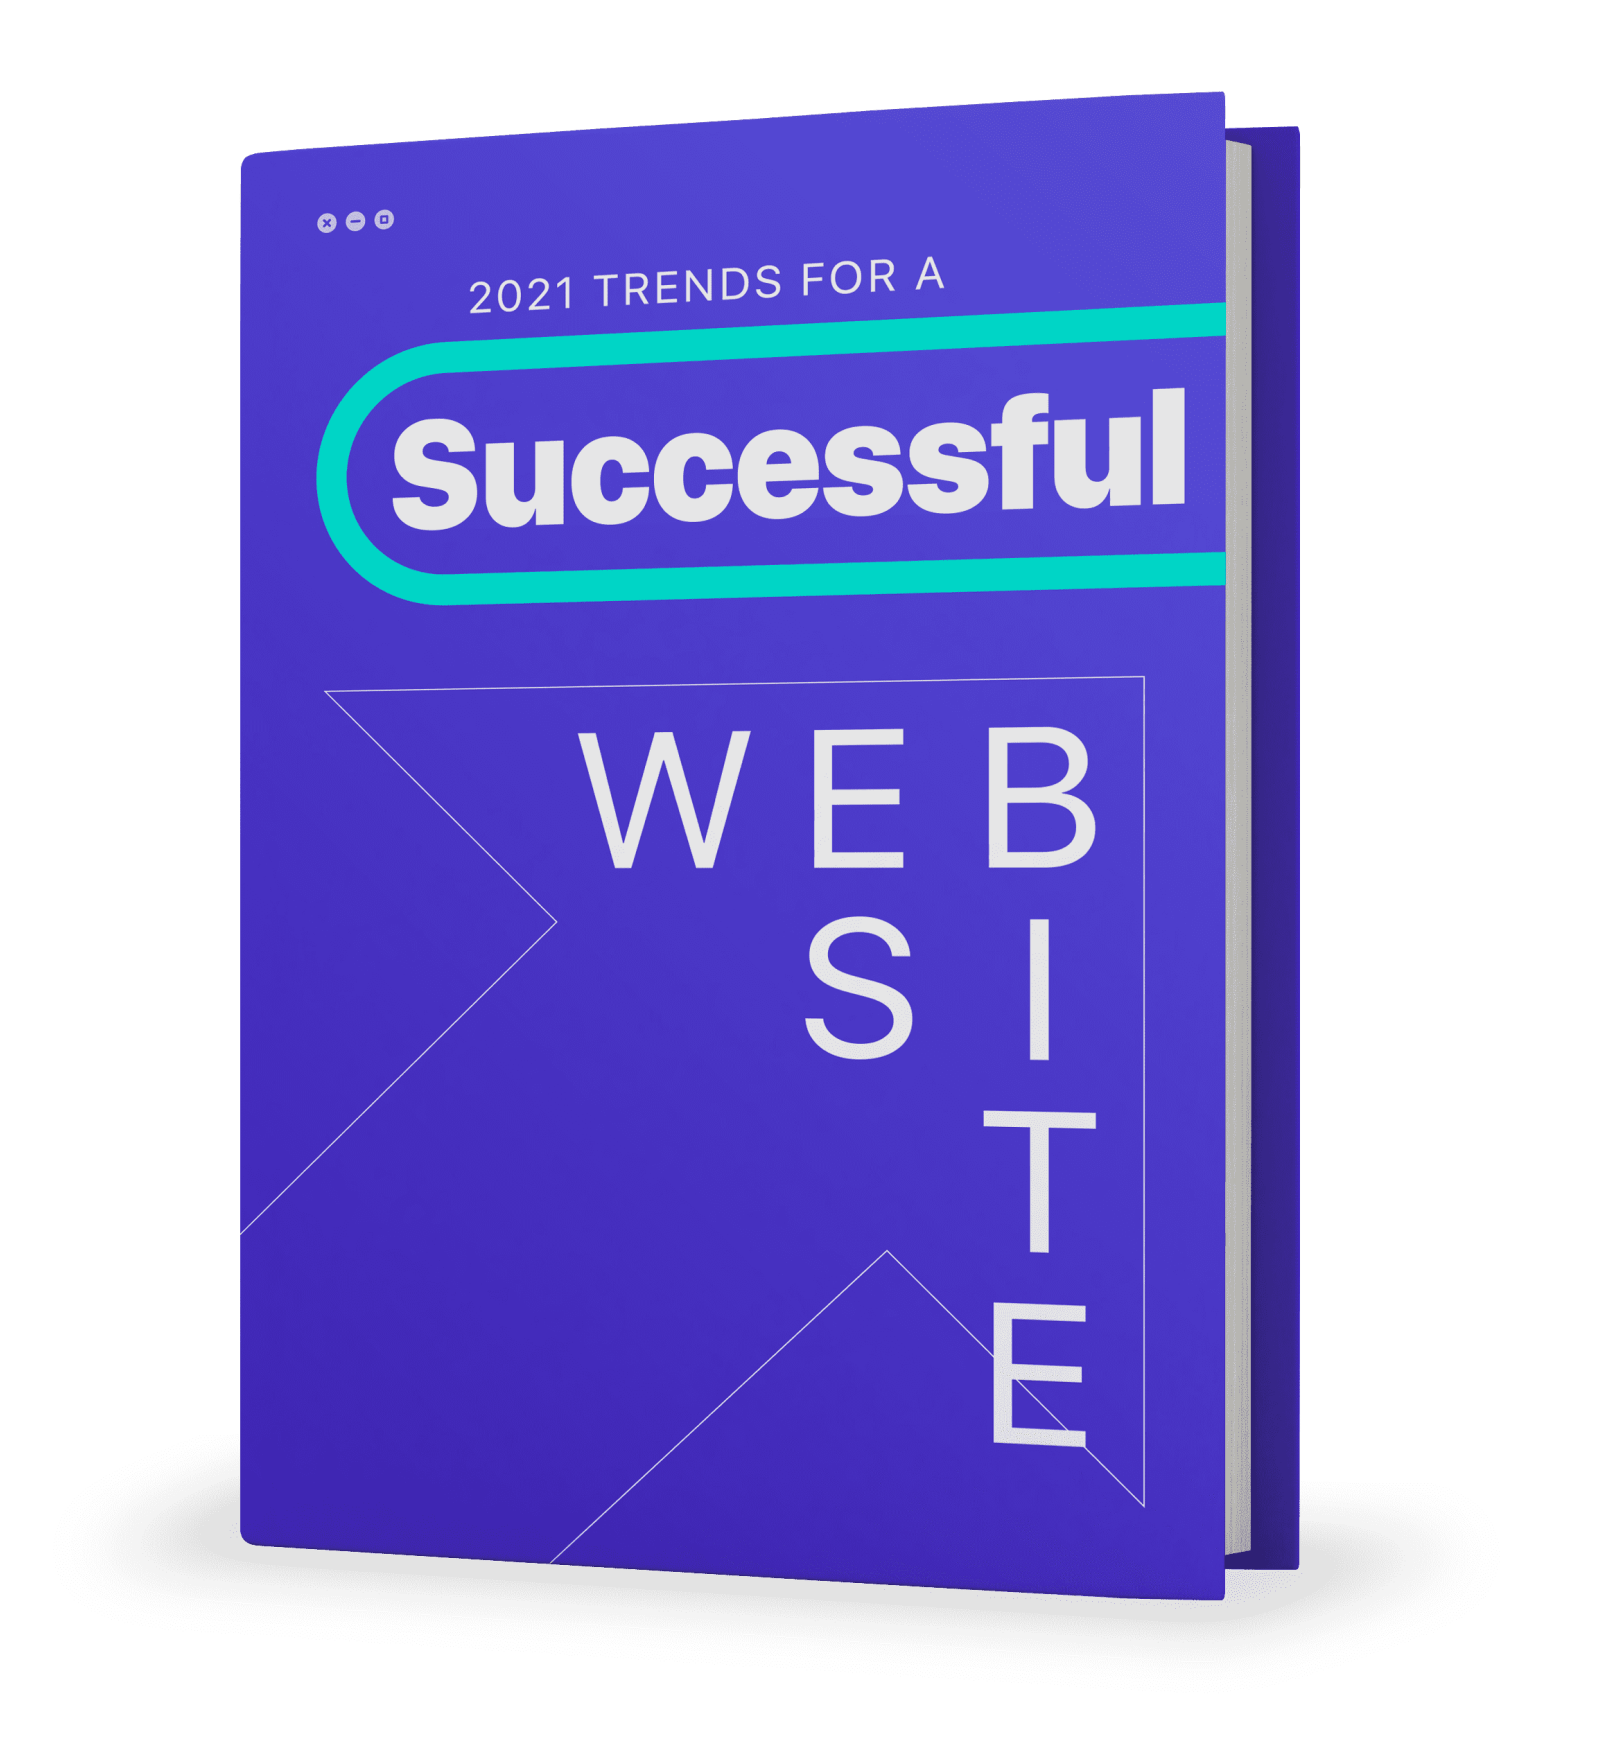 Download our free eBook. 2021 Trends for a Successful Website